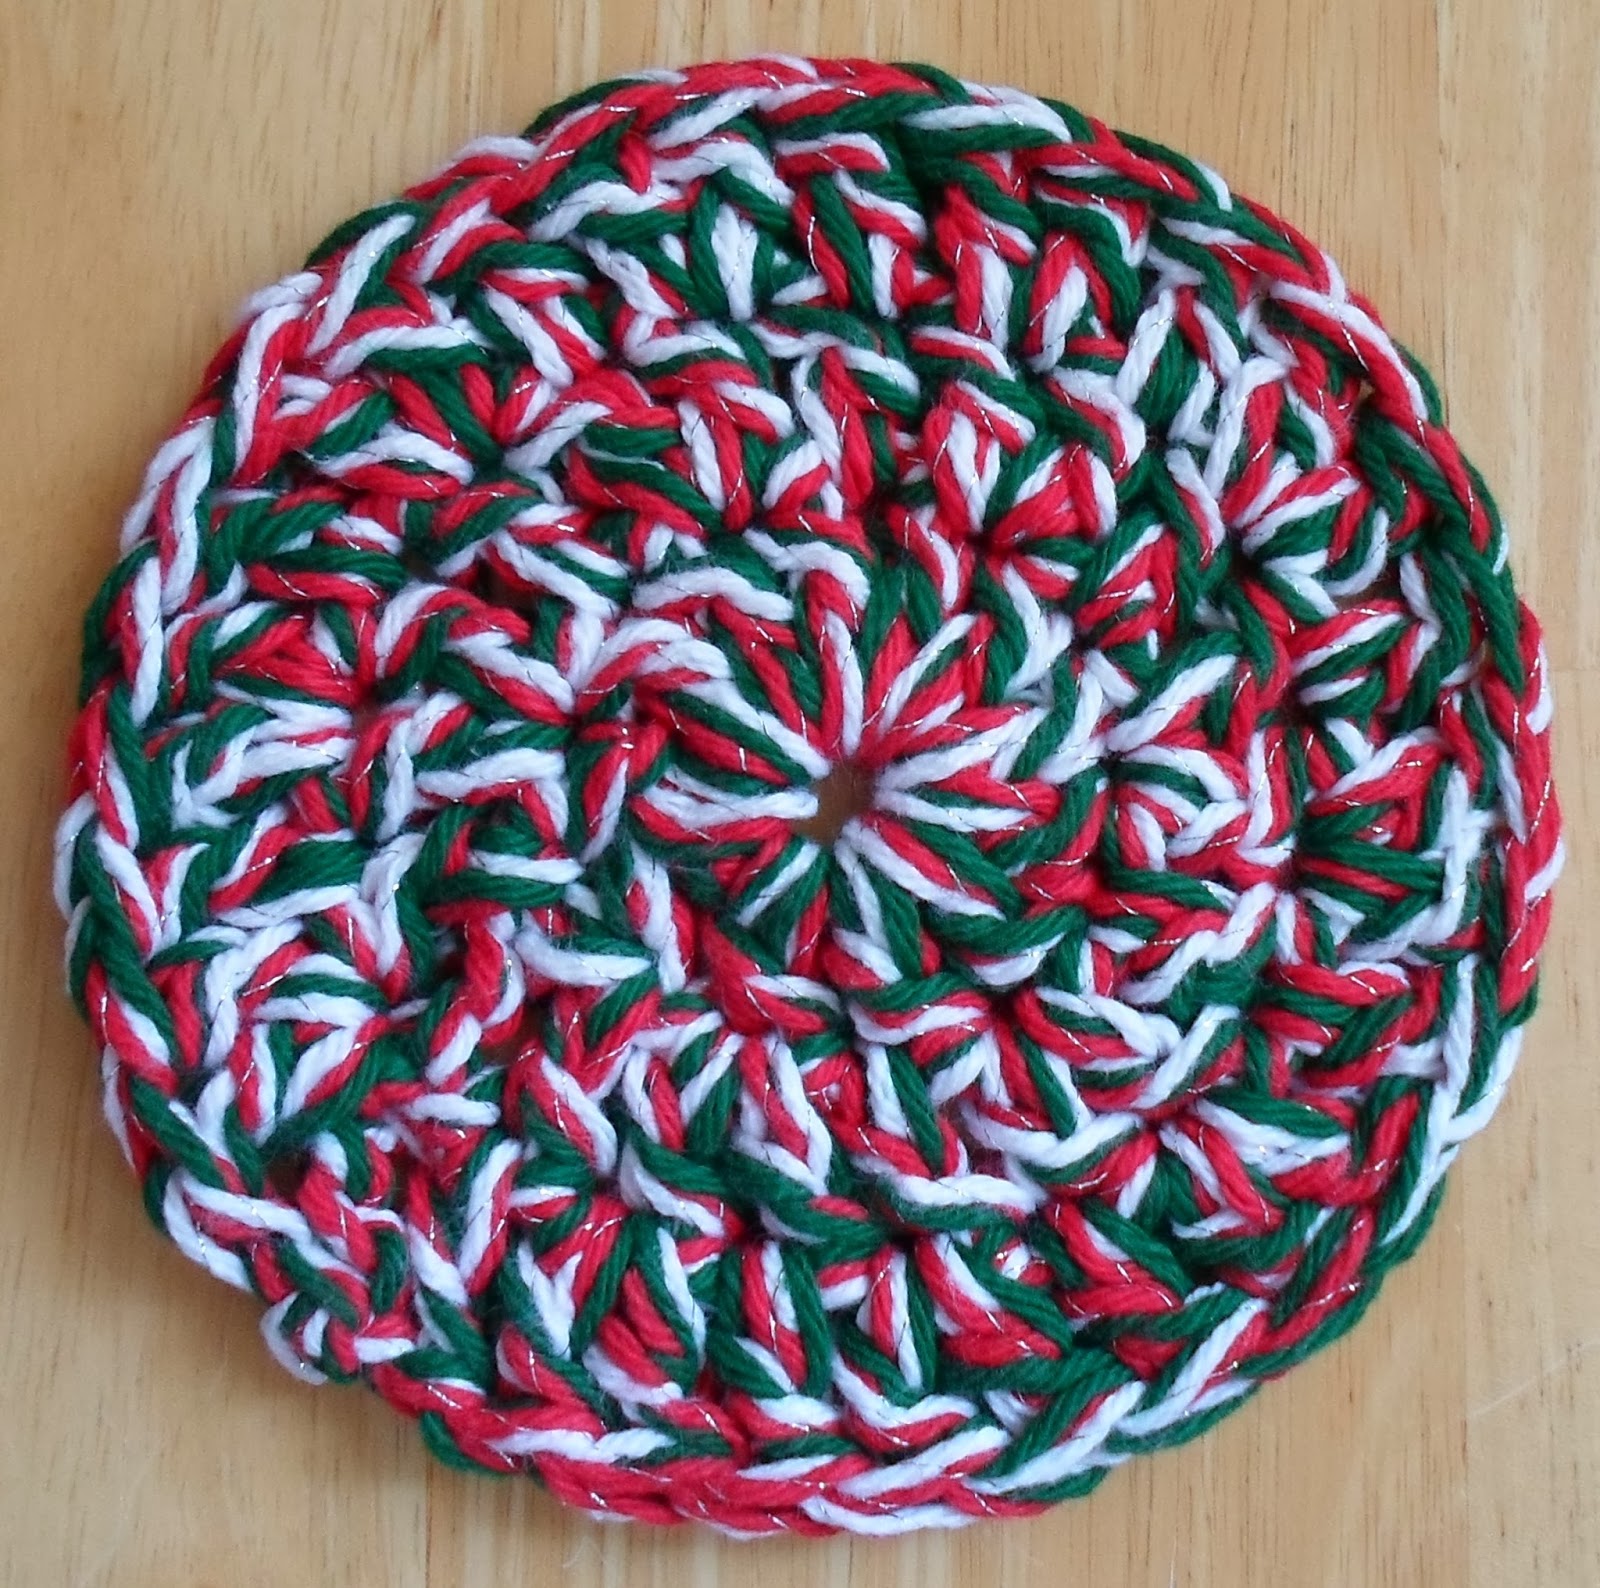 Happier Than A Pig In Mud: Chunky 3-Strand Cotton Trivets-Crochet